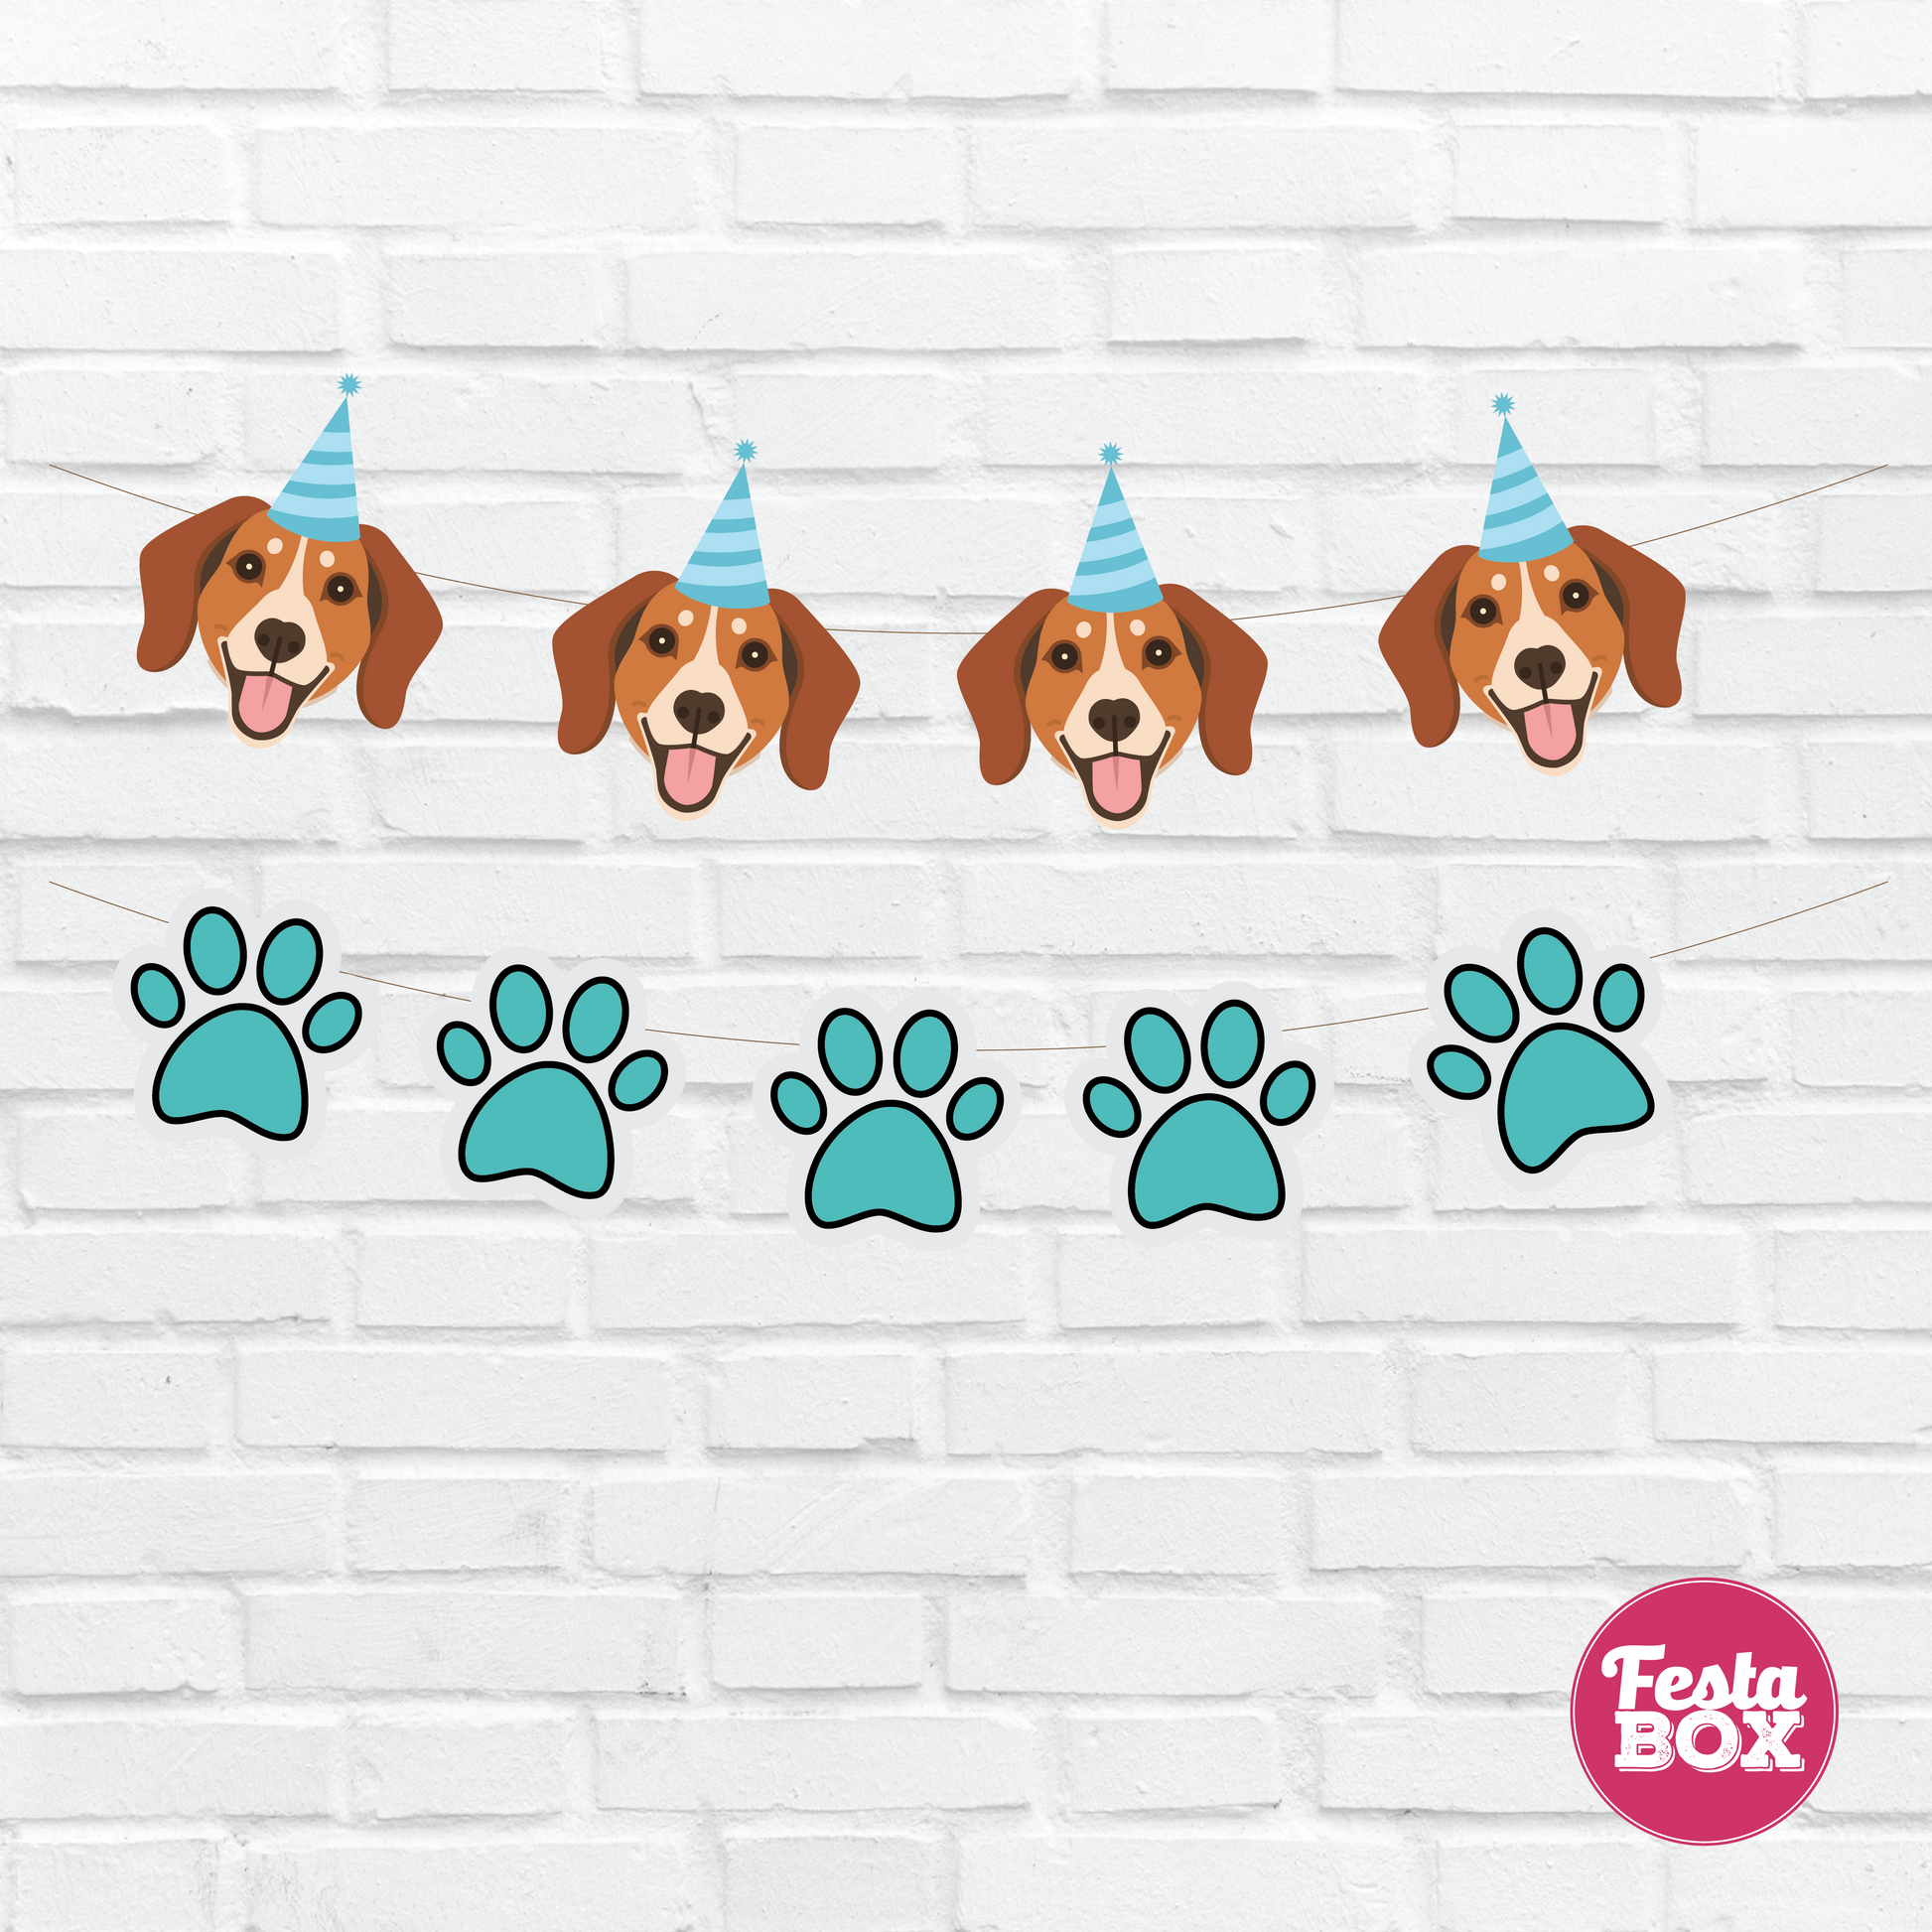 This background banner is part of the Puppy Birthday Party Theme Collection by Festabox.